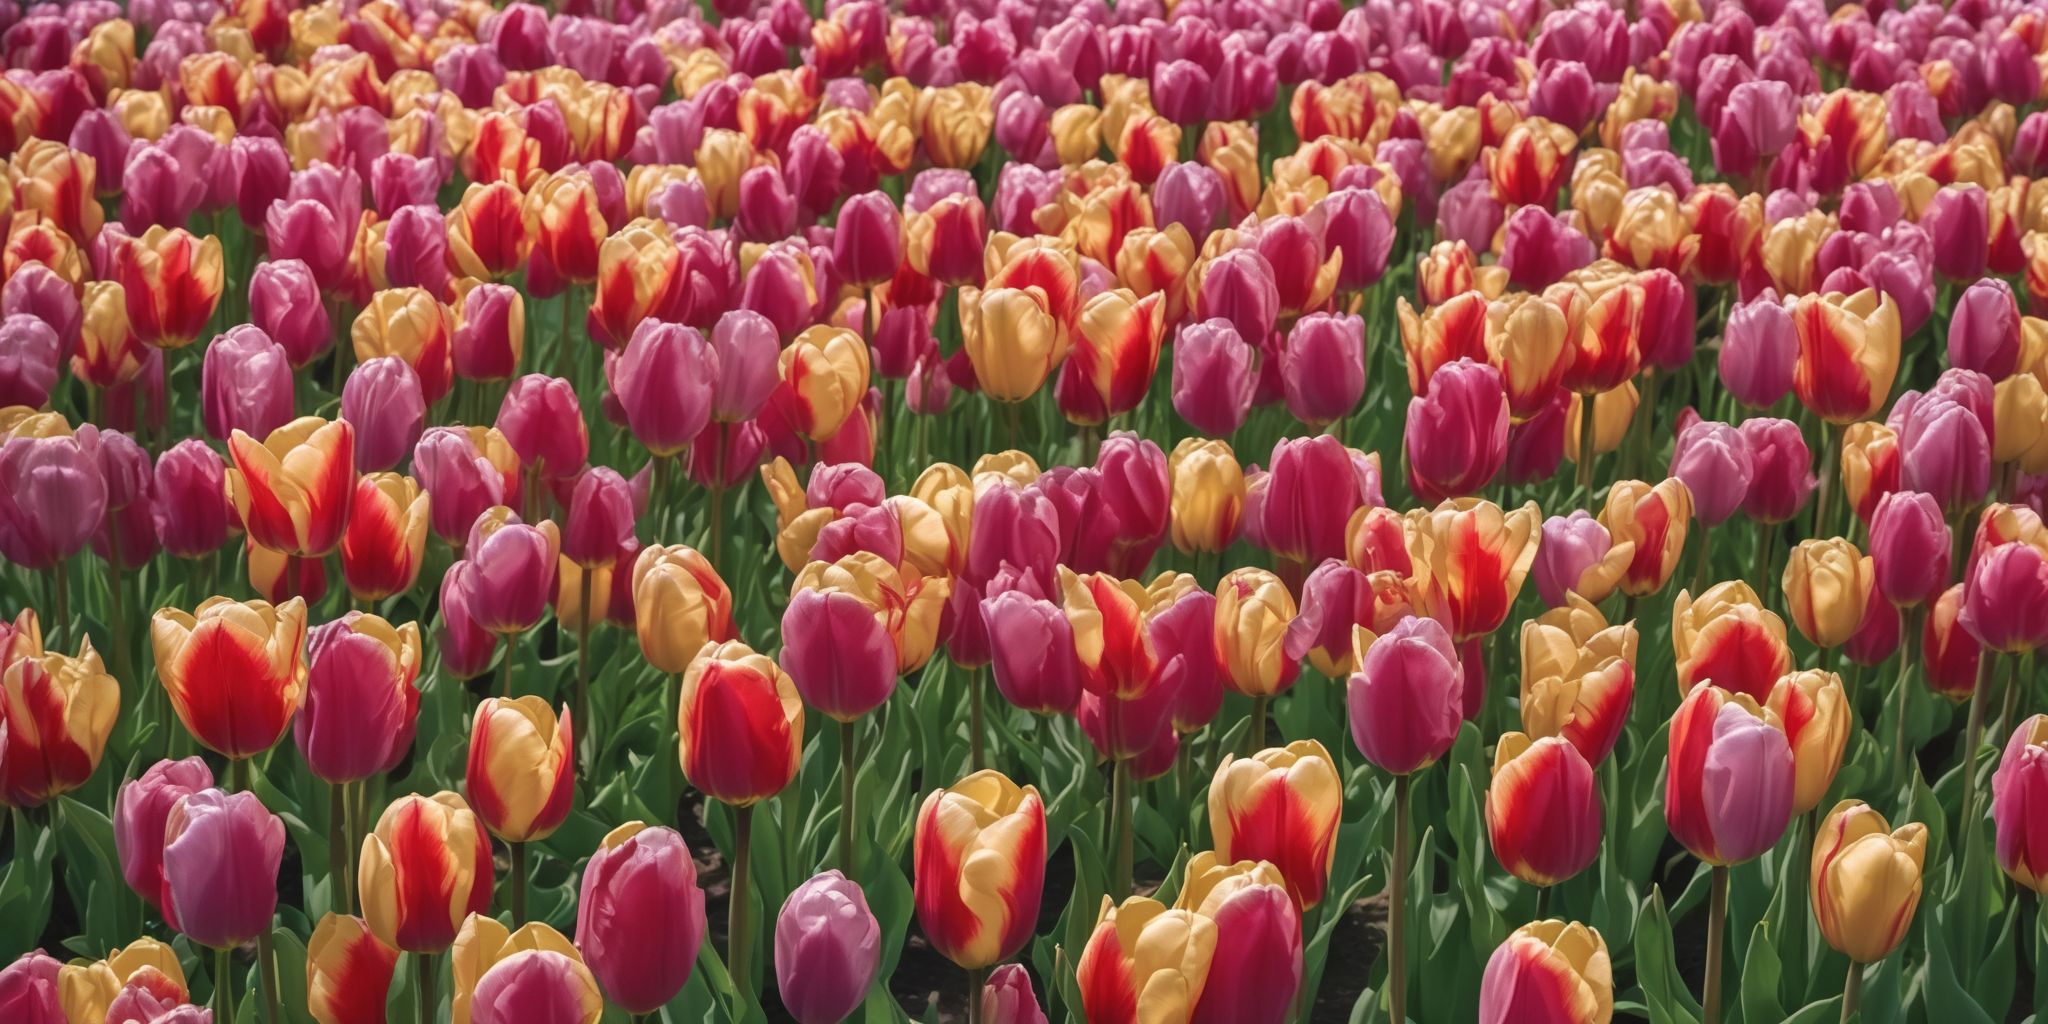 Tulip garden  in realistic, photographic style